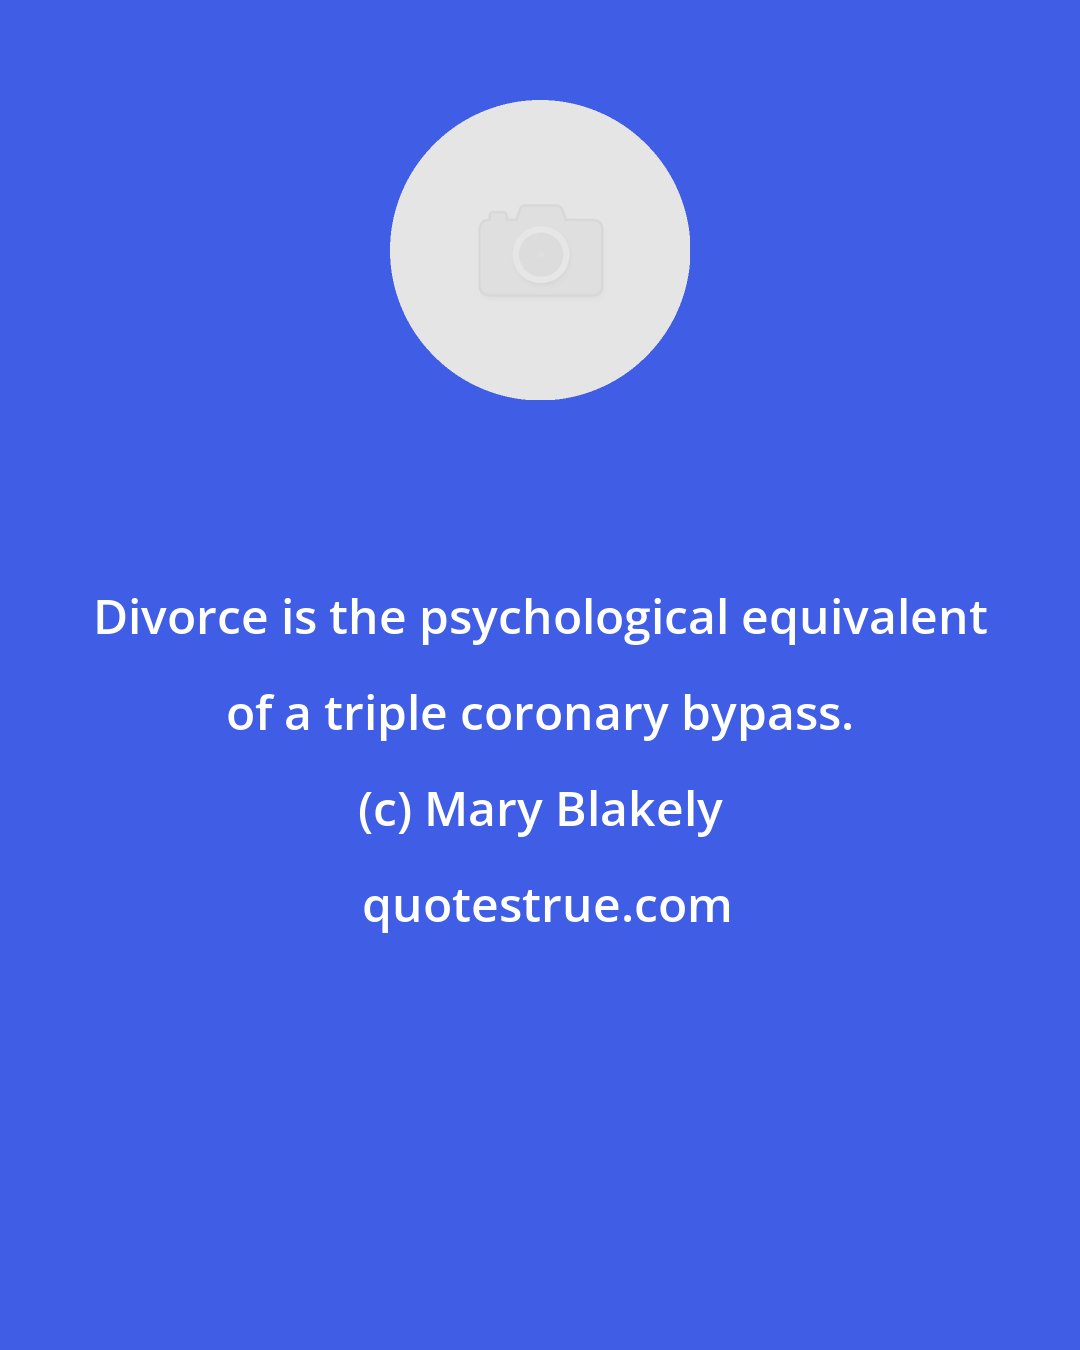 Mary Blakely: Divorce is the psychological equivalent of a triple coronary bypass.